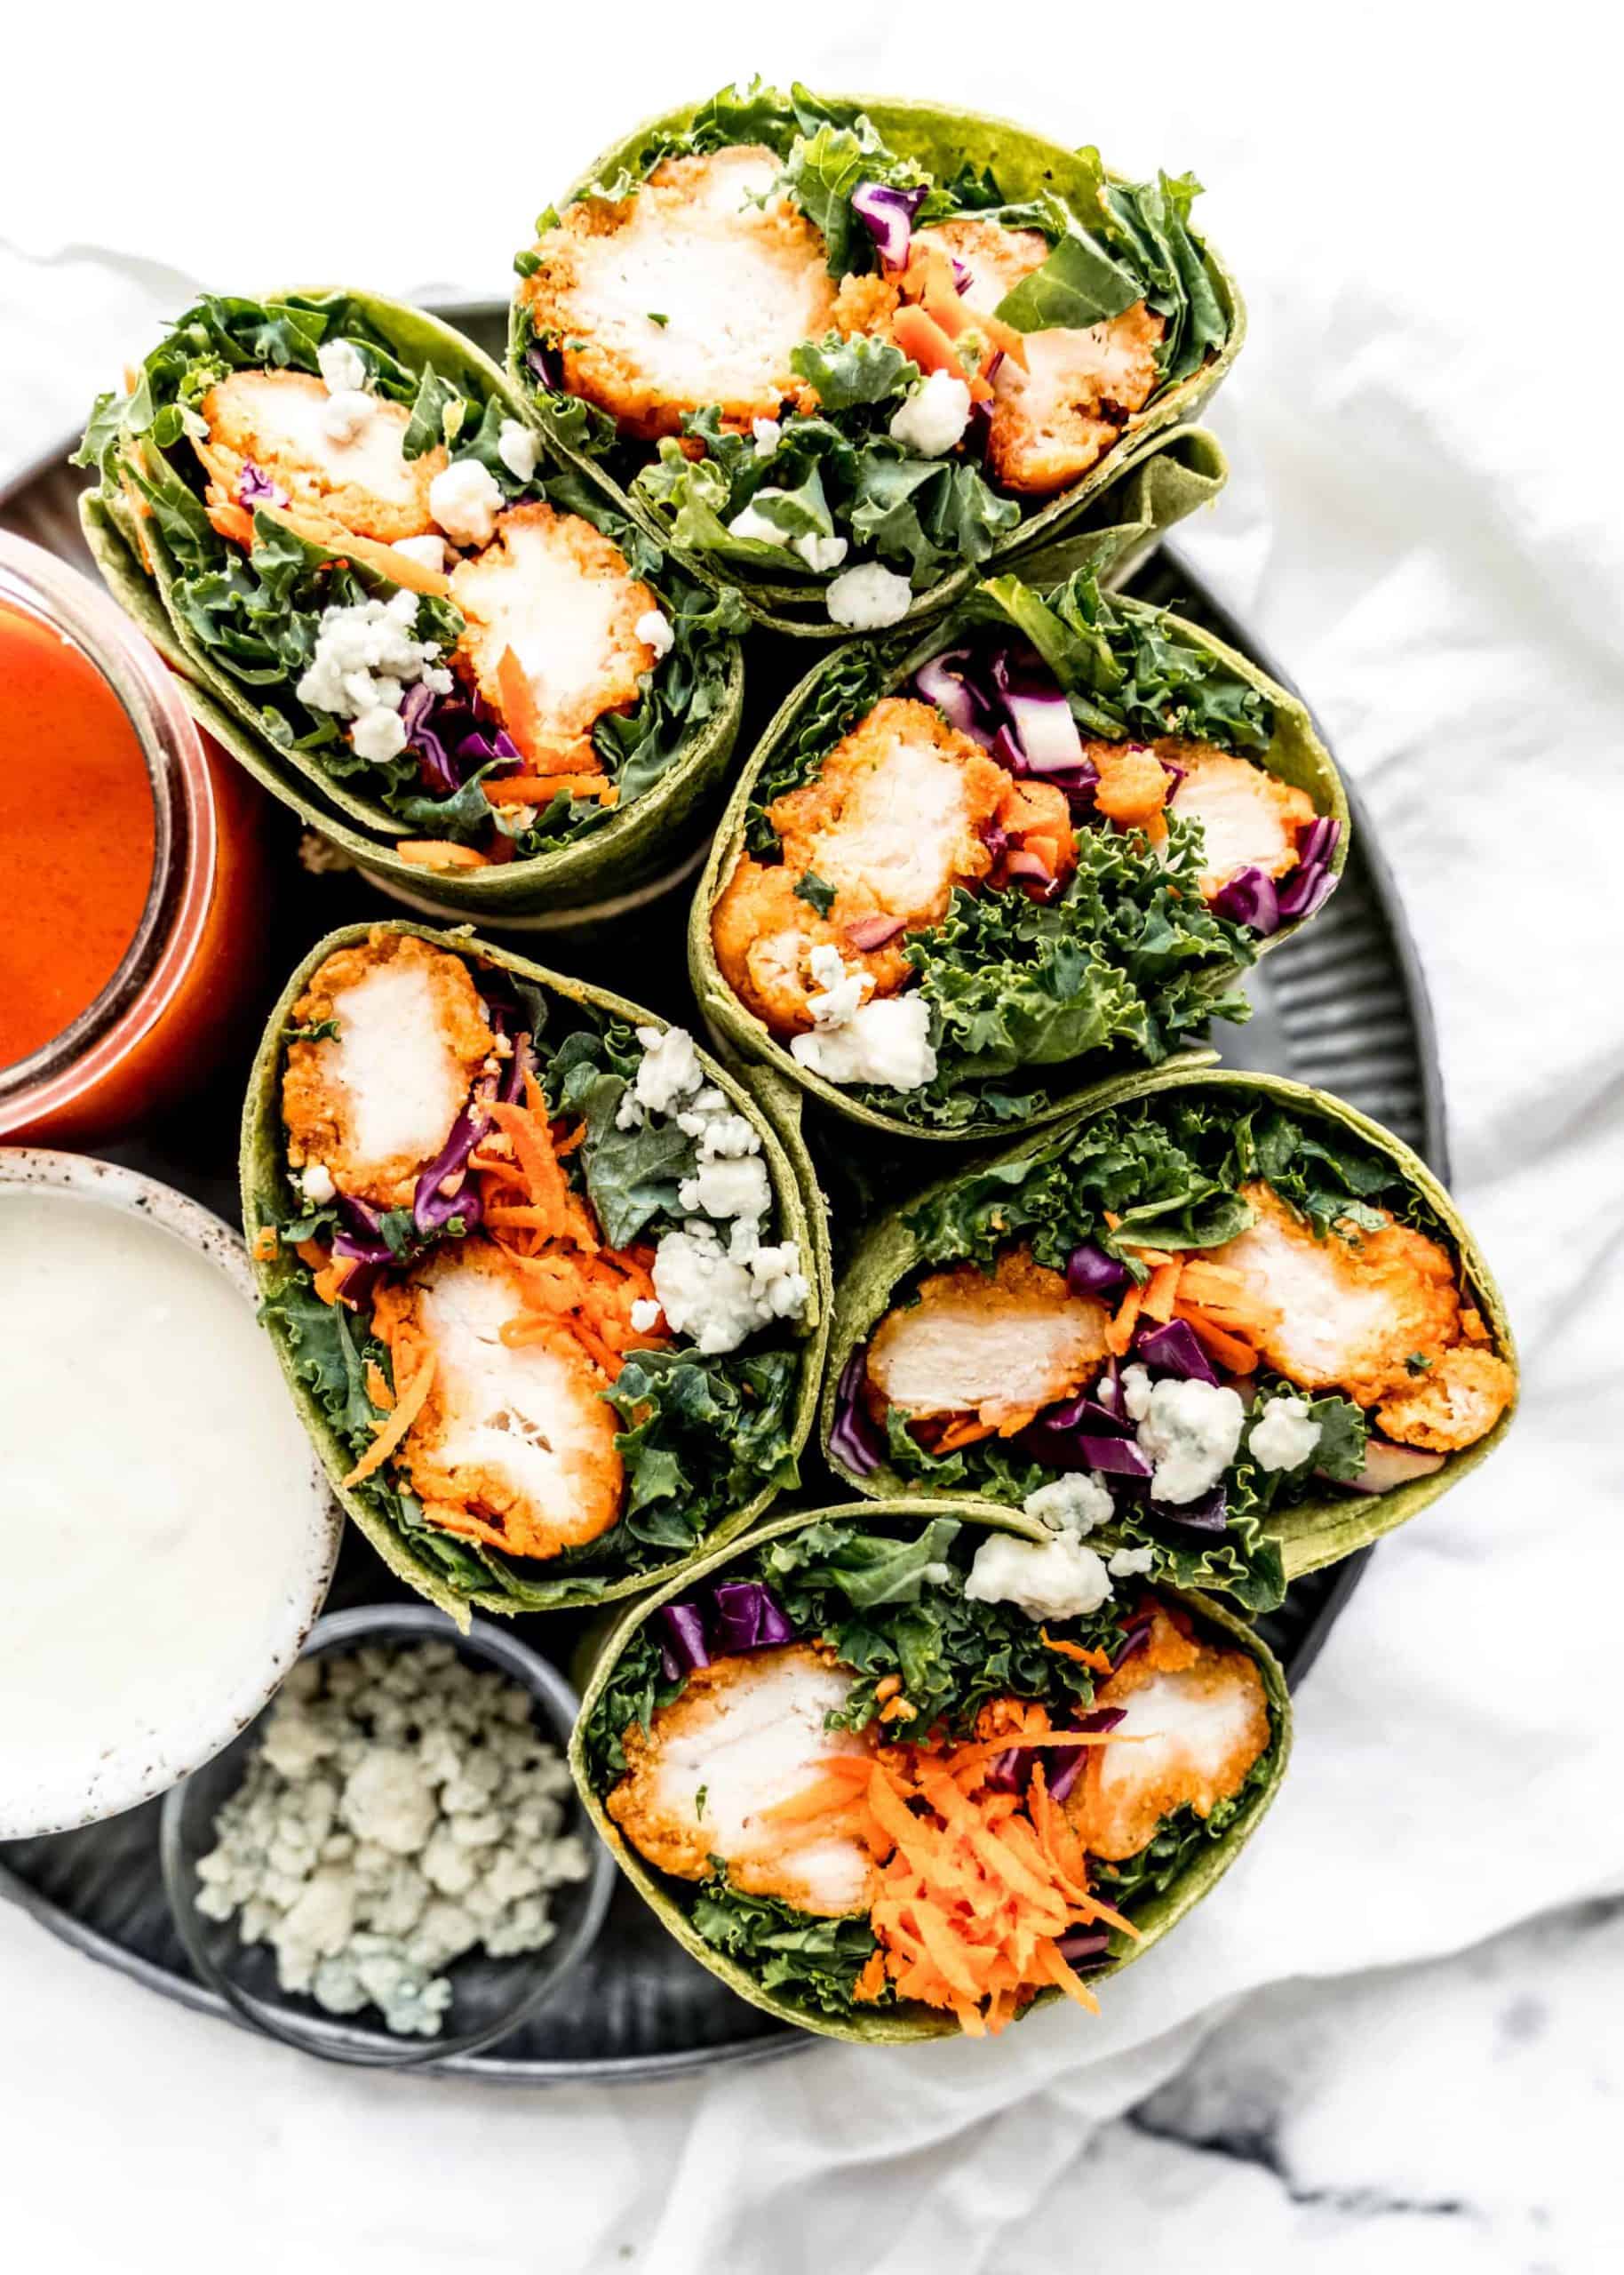 25-minute-buffalo-chicken-wraps-with-kale-cabbage-windy-city-dinner